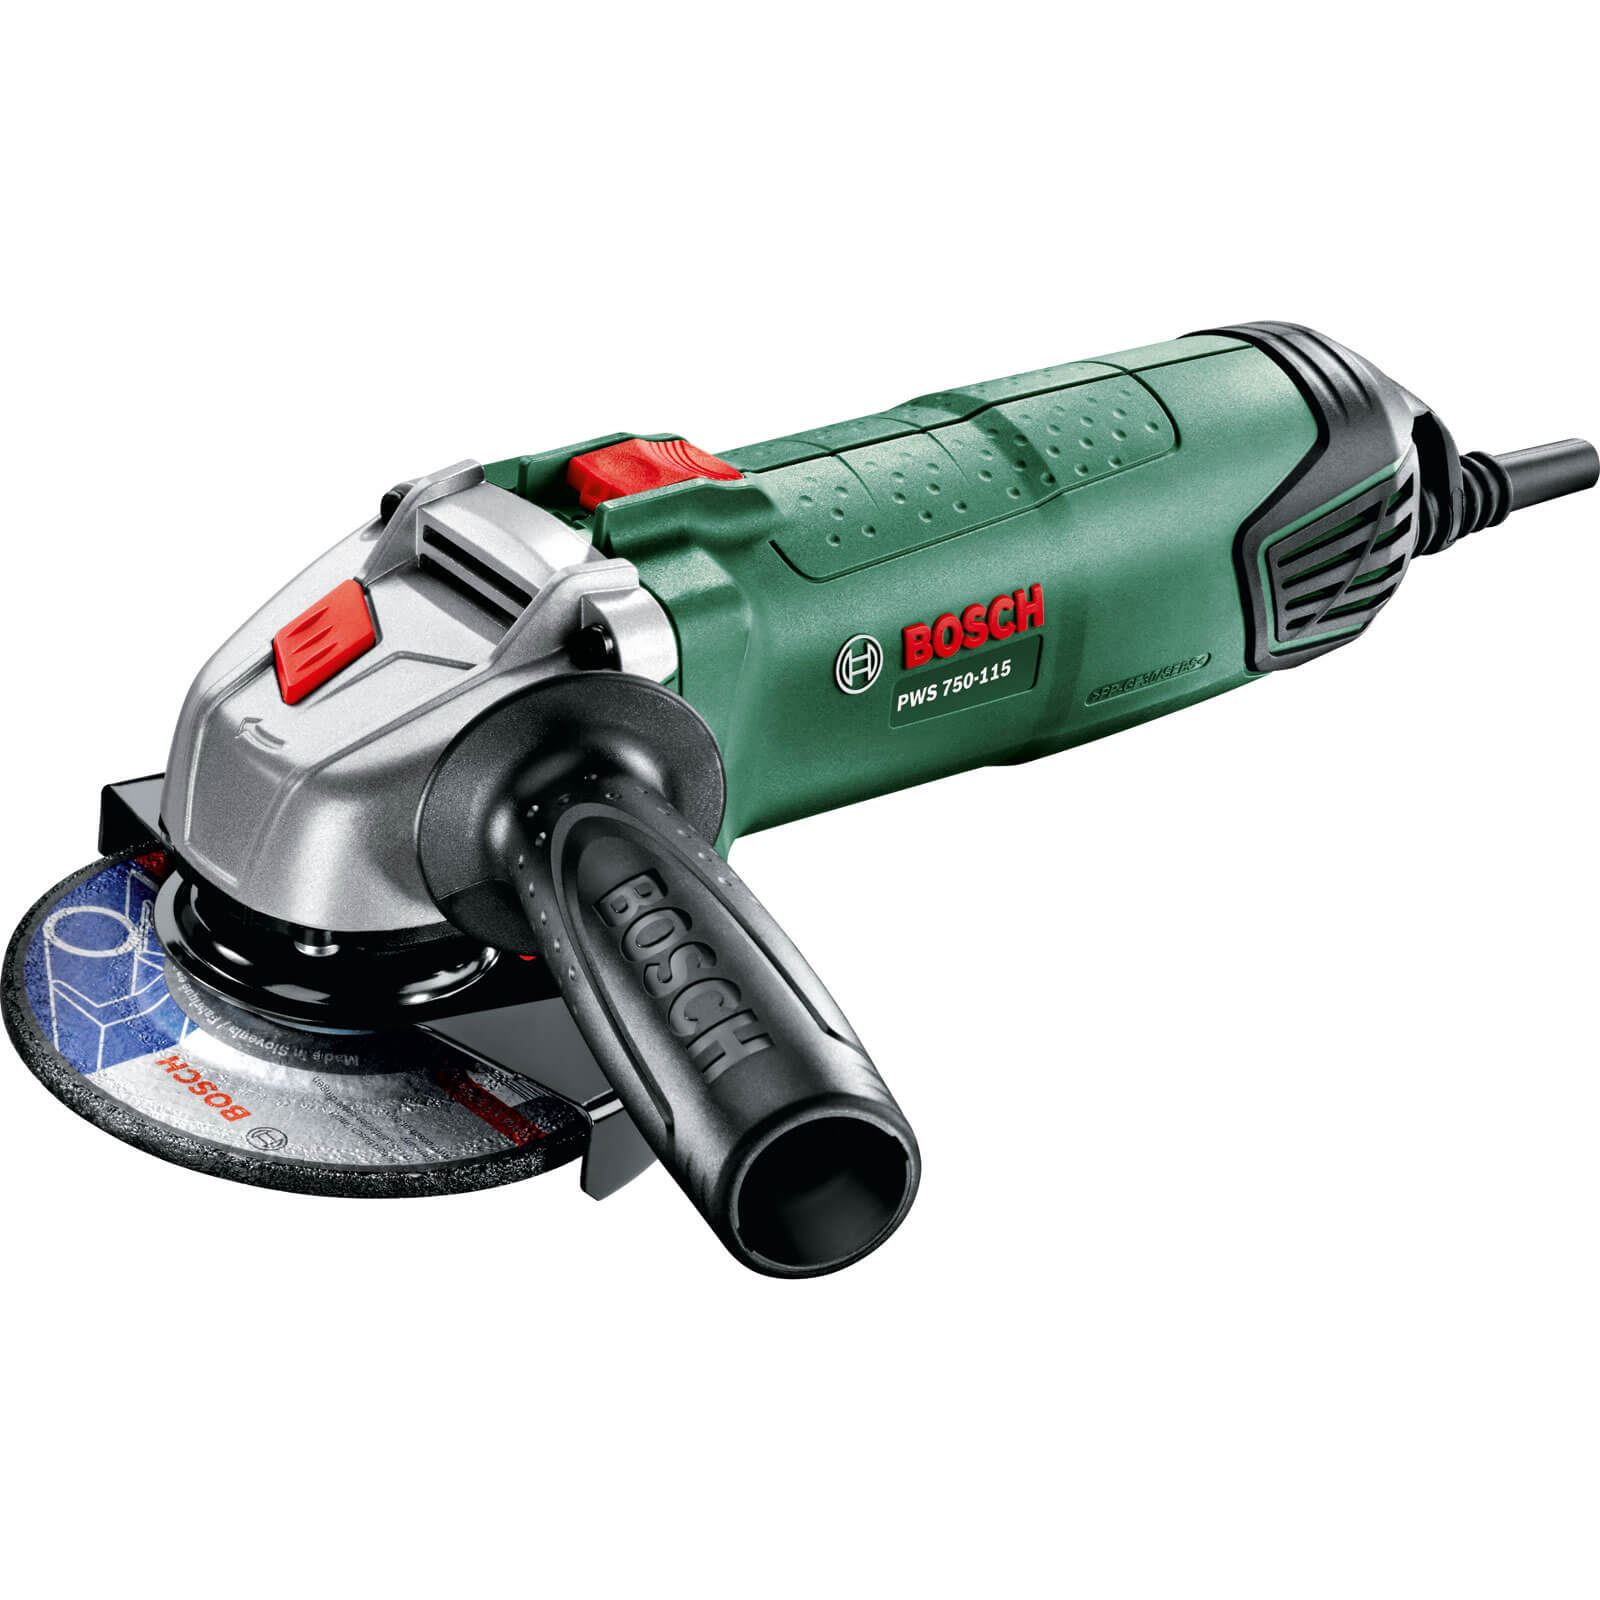 Bosch PWS 750-115 Electric Angle Grinder 115mm / 4.5" Disc 750w 240v